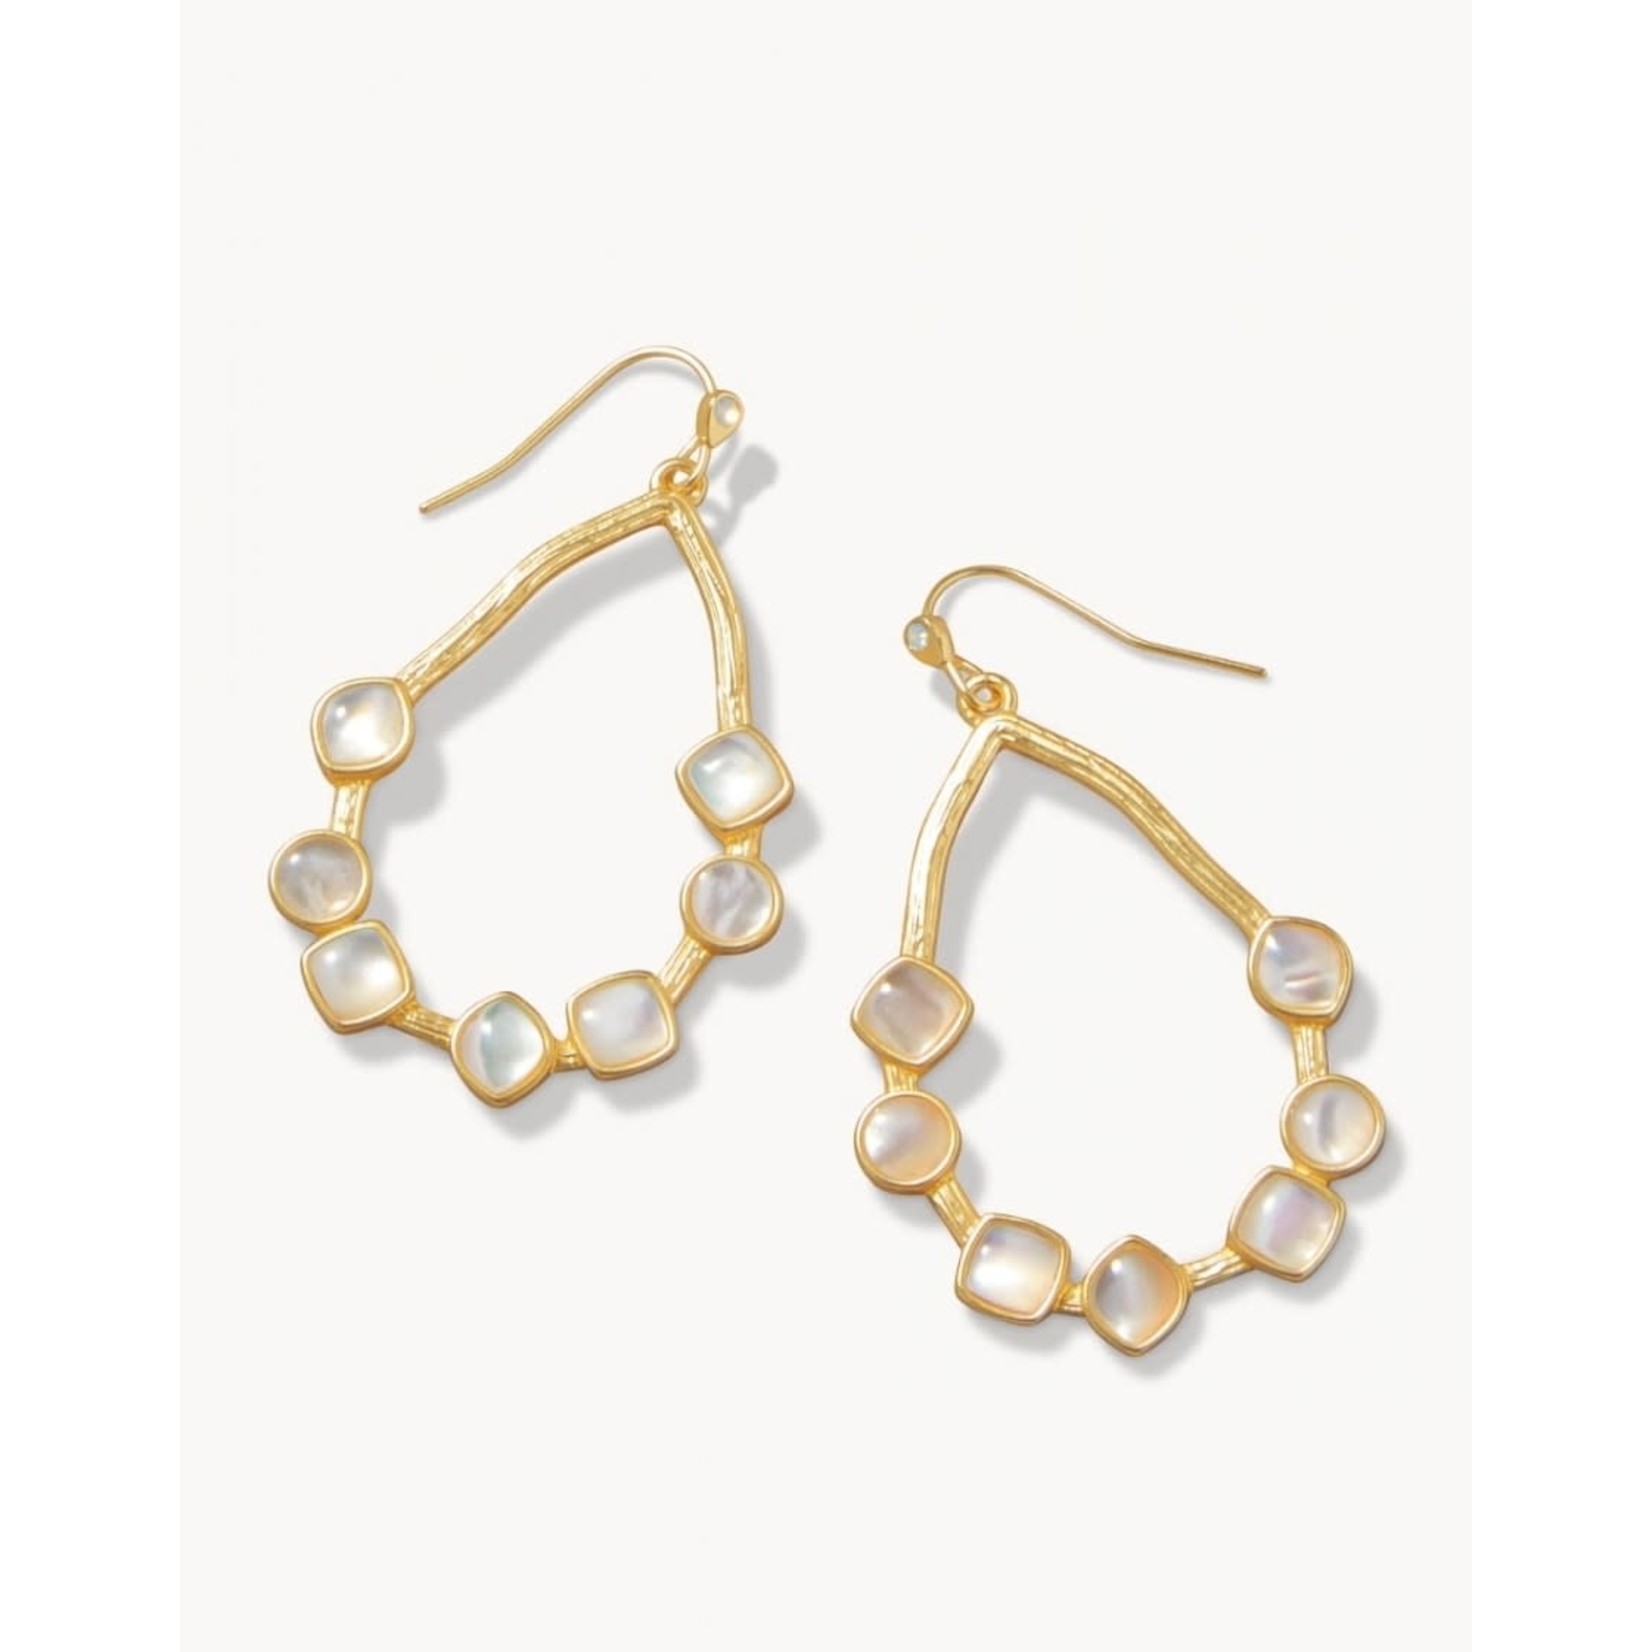 Spartina Maera Earrings Mother-of-Pearl